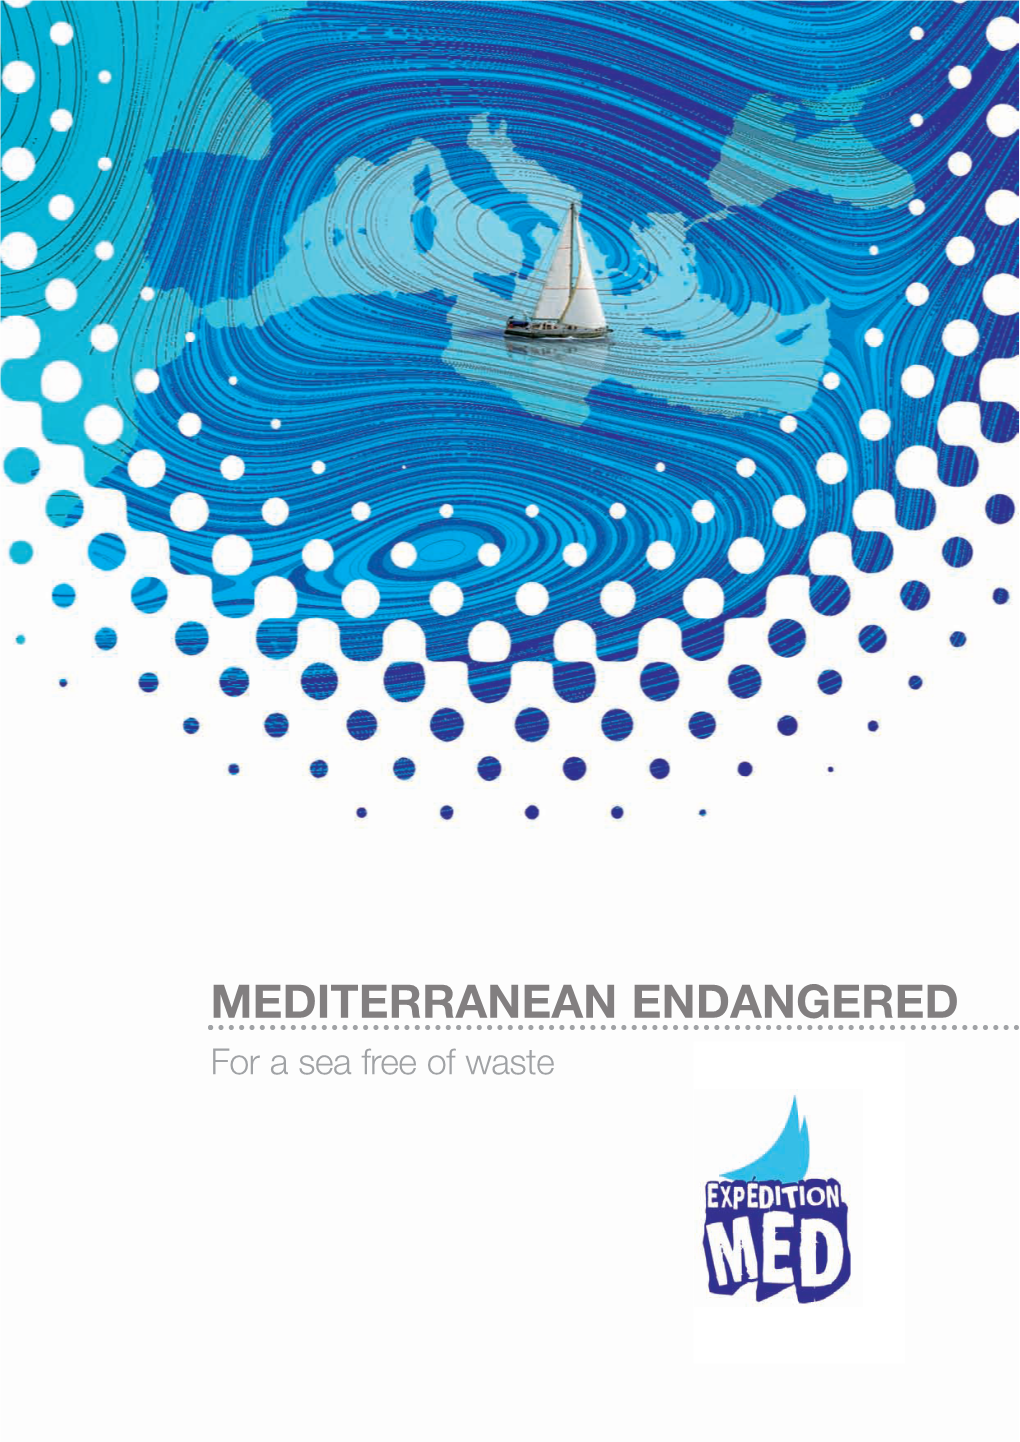 MEDITERRANEAN ENDANGERED for a Sea Free of Waste Programme Summary